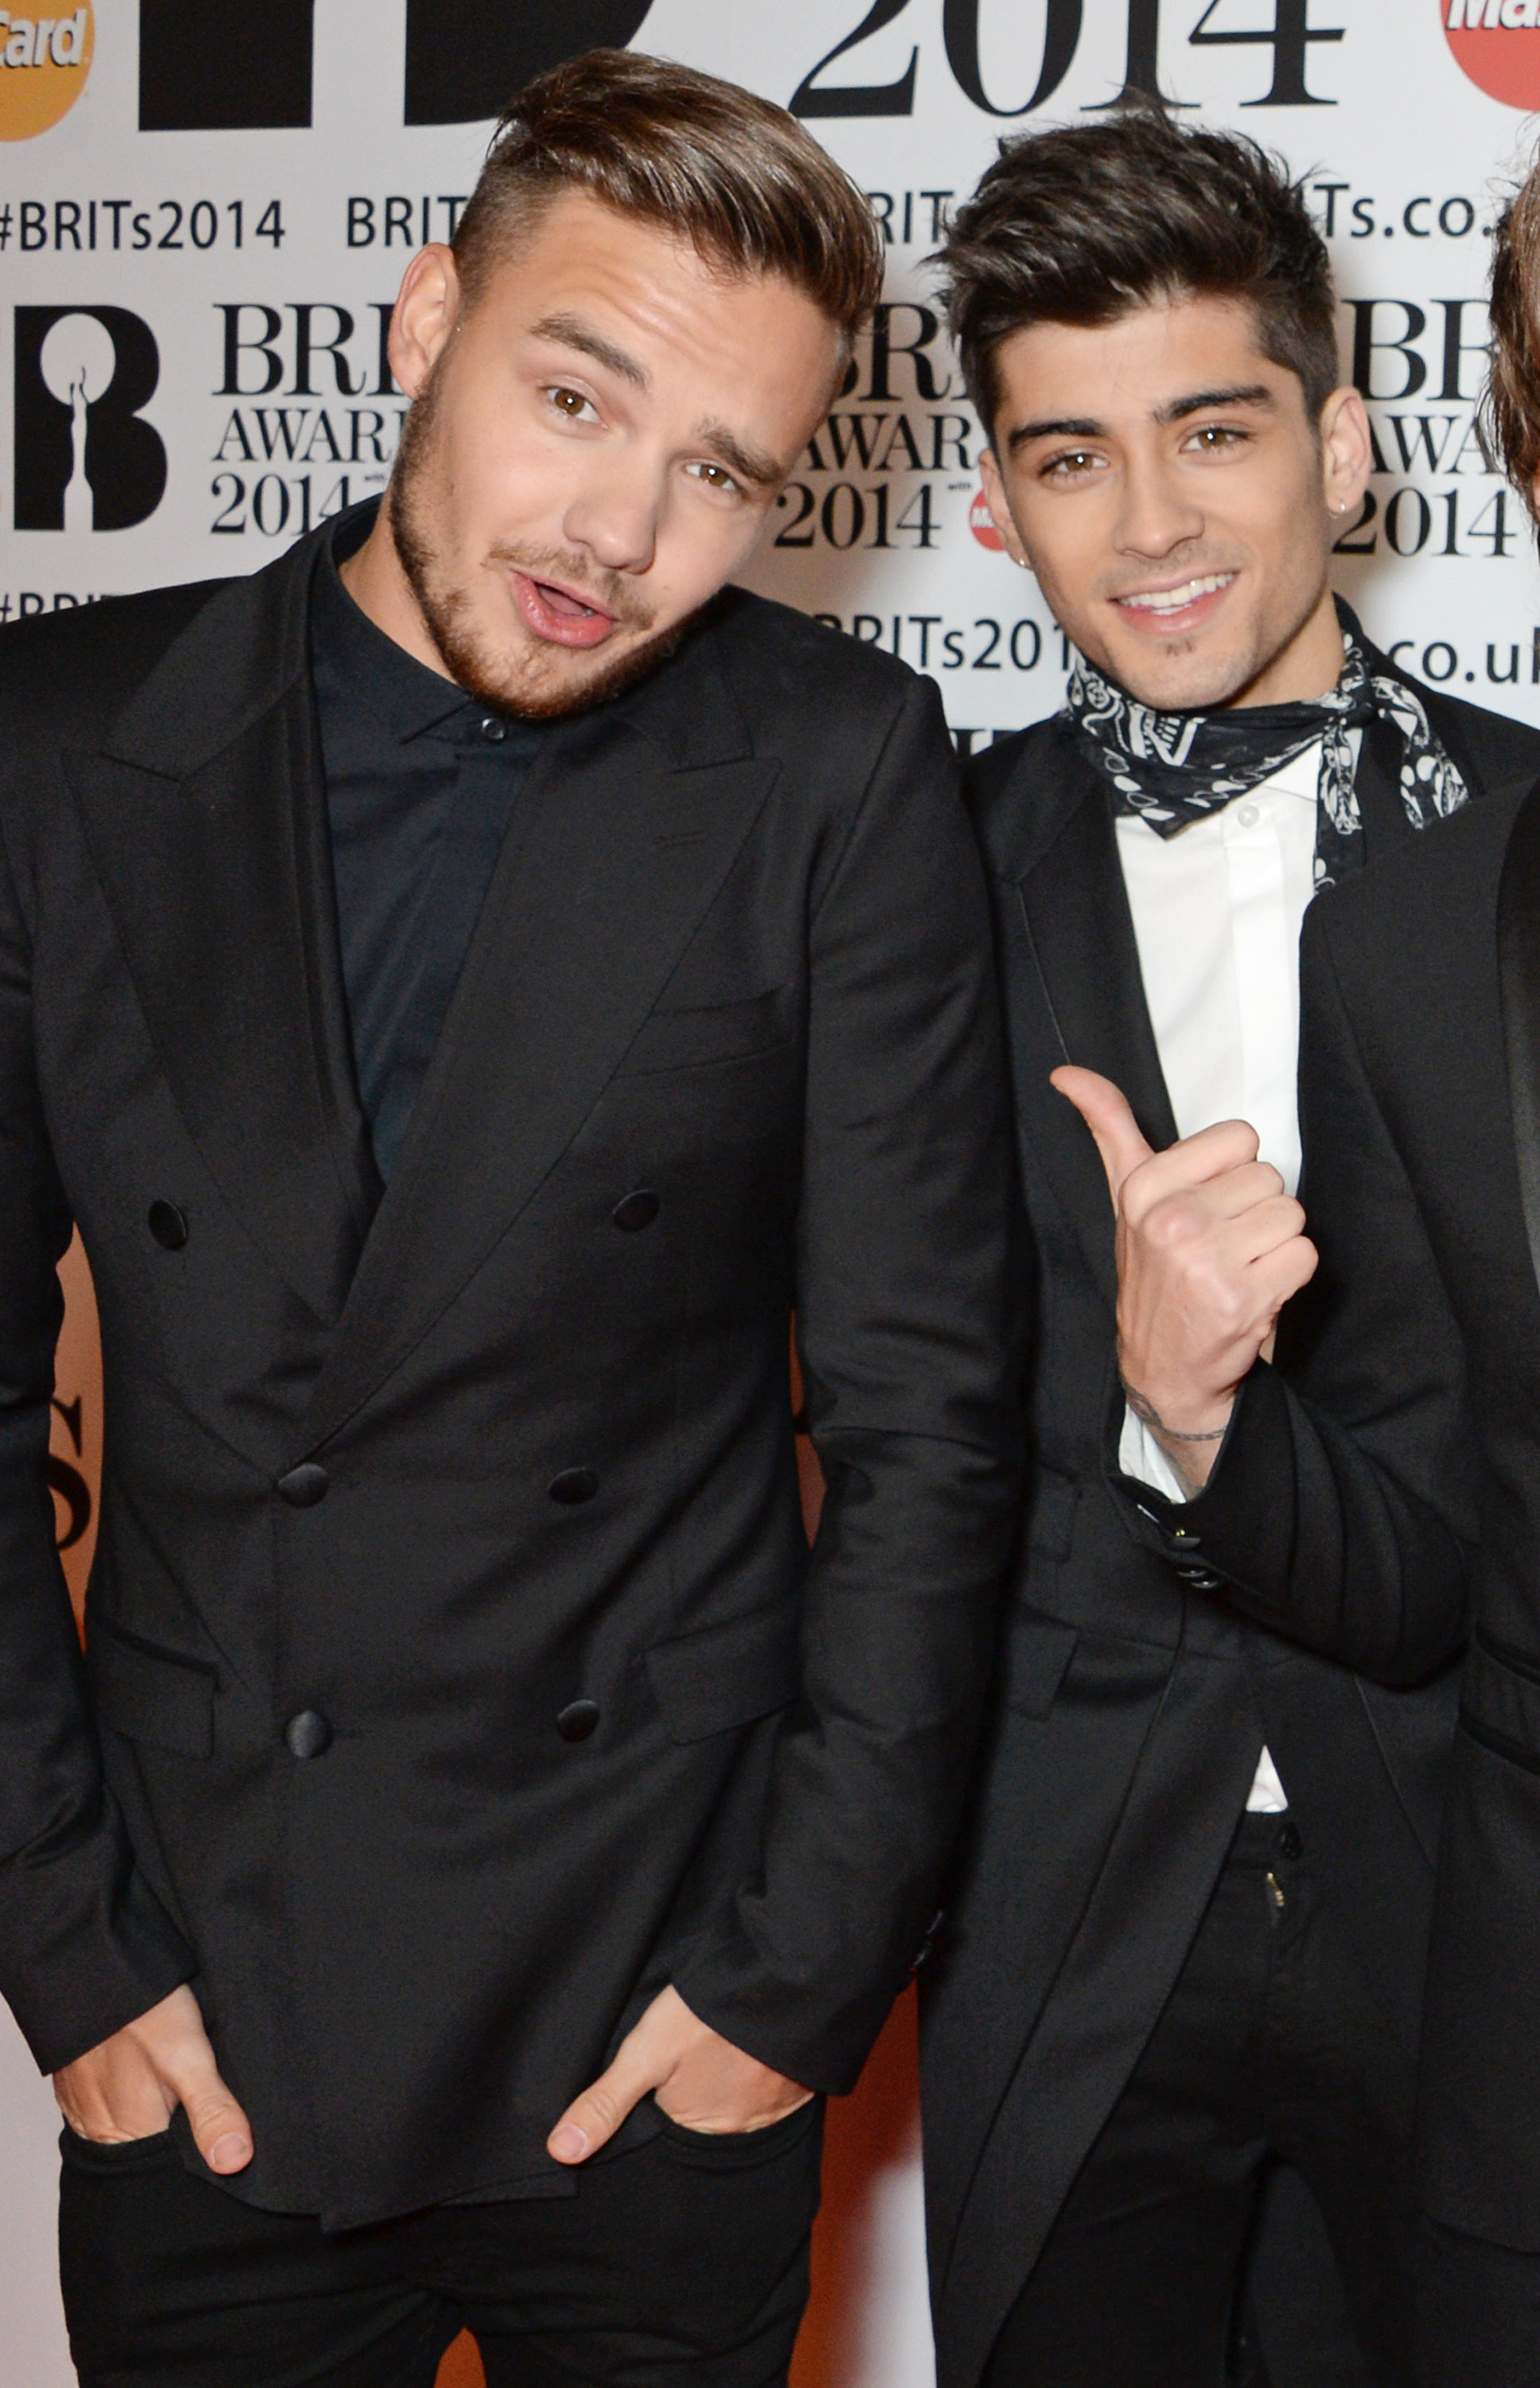 Liam Payne and Zayn Malik of One Direction attend The BRIT Awards 2014 at the 02 Arena on Feb. 19, 2014 in London.